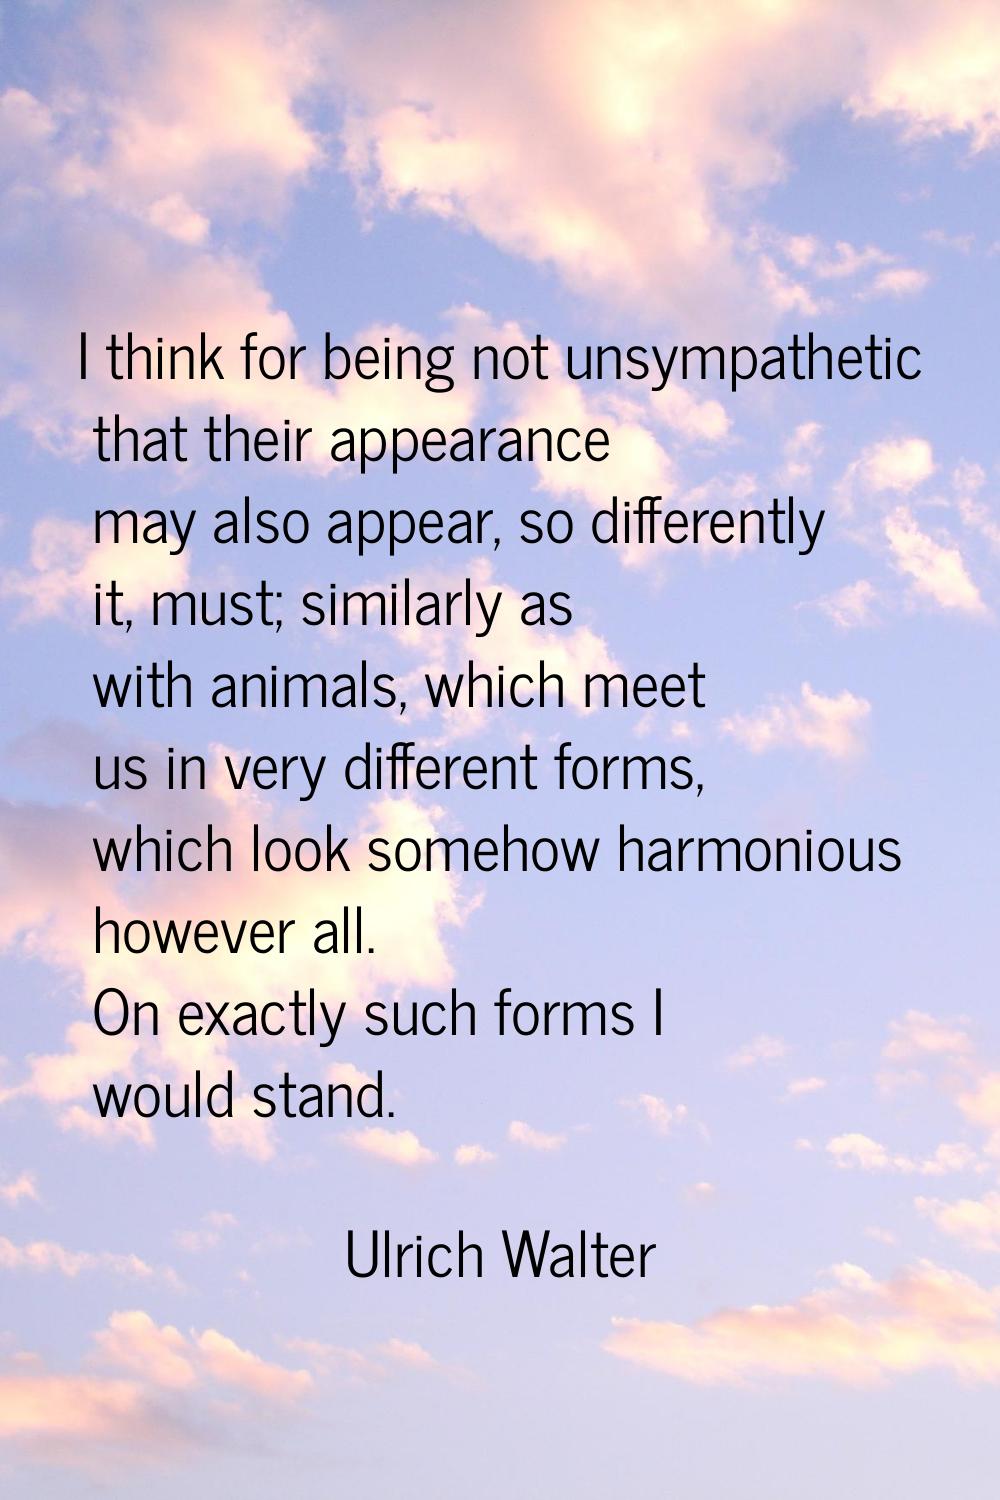 I think for being not unsympathetic that their appearance may also appear, so differently it, must;